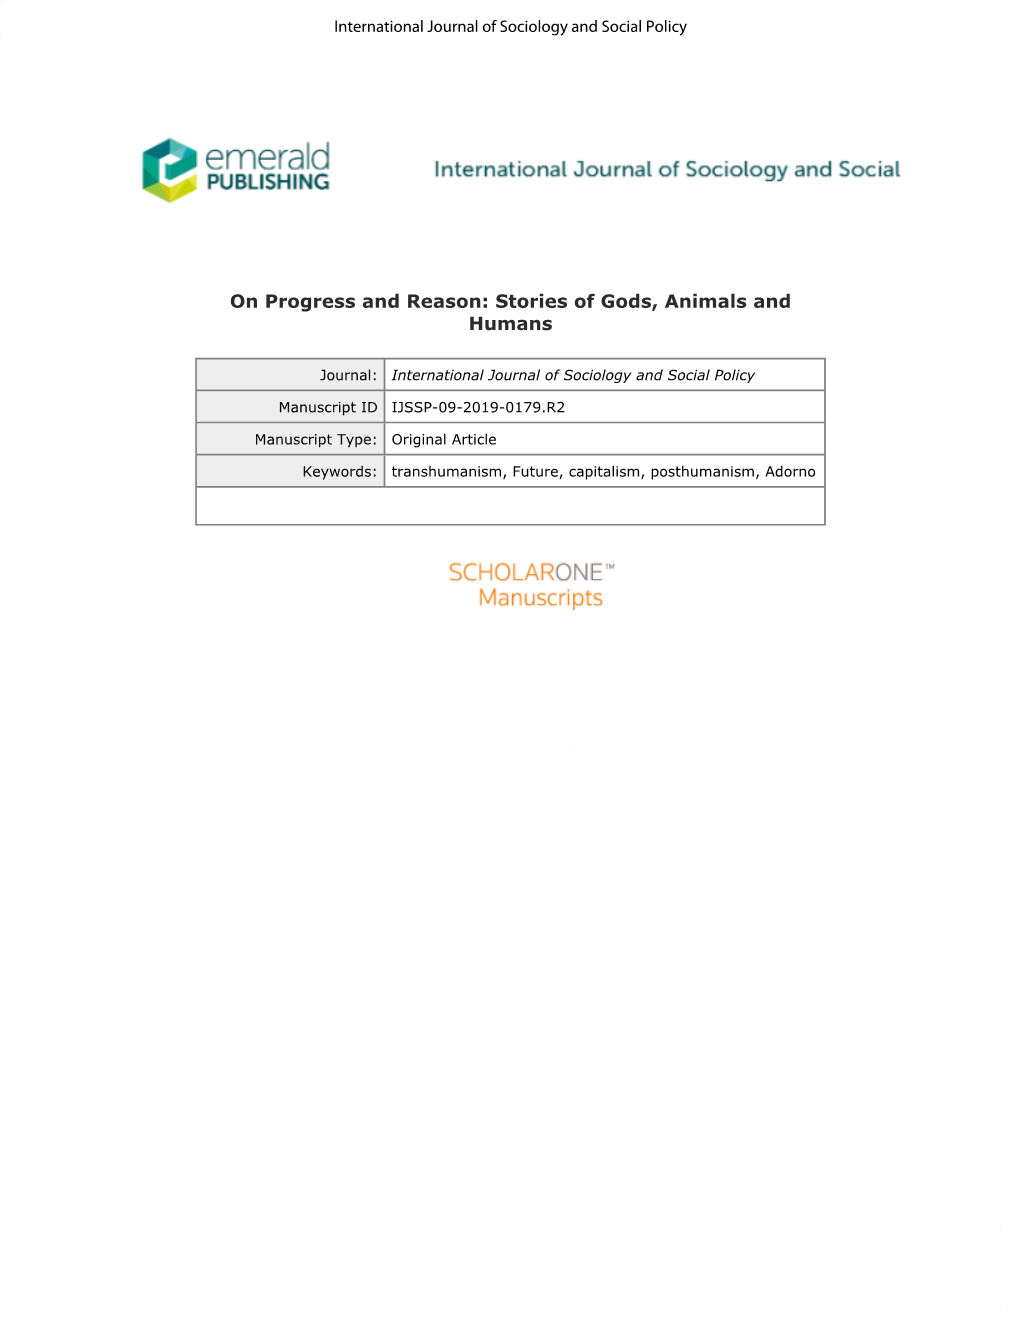 International Journal of Sociology and Social Policy International Journal of Sociology and Social Policy